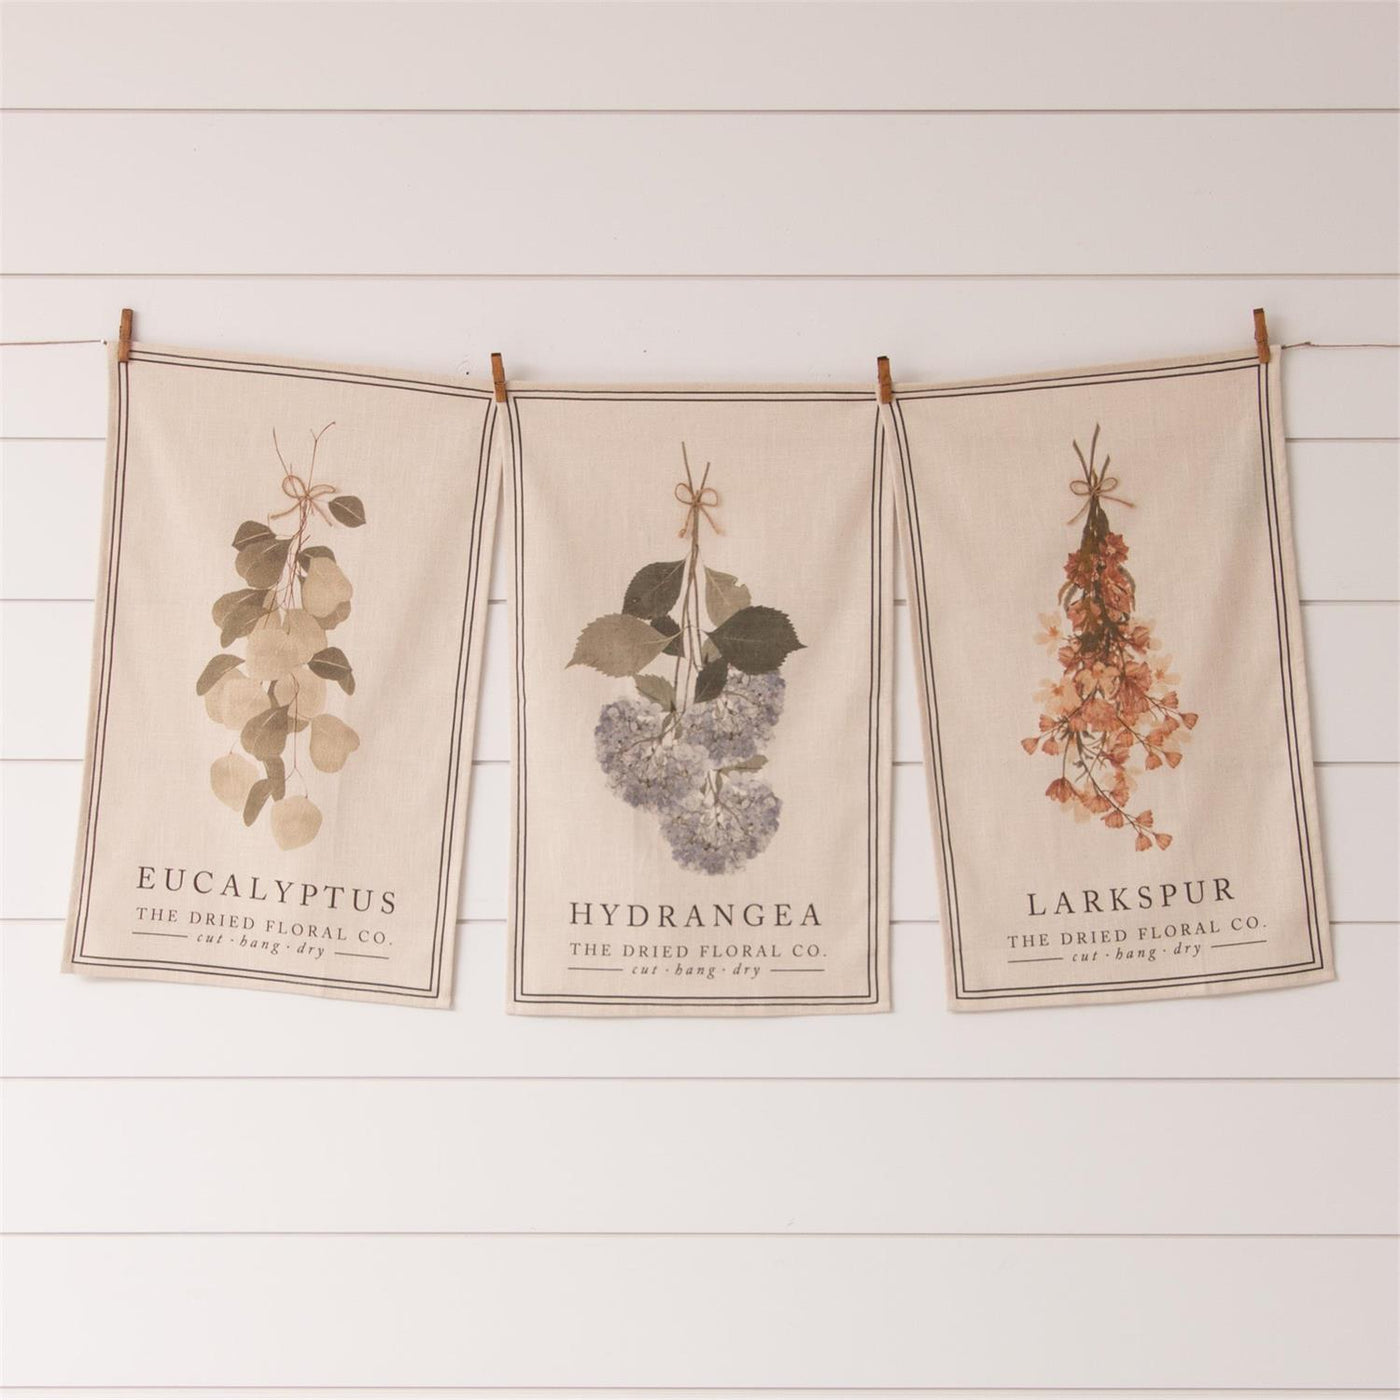 Set of 3 Dried Floral Co Botanical Themed Kitchen Towels